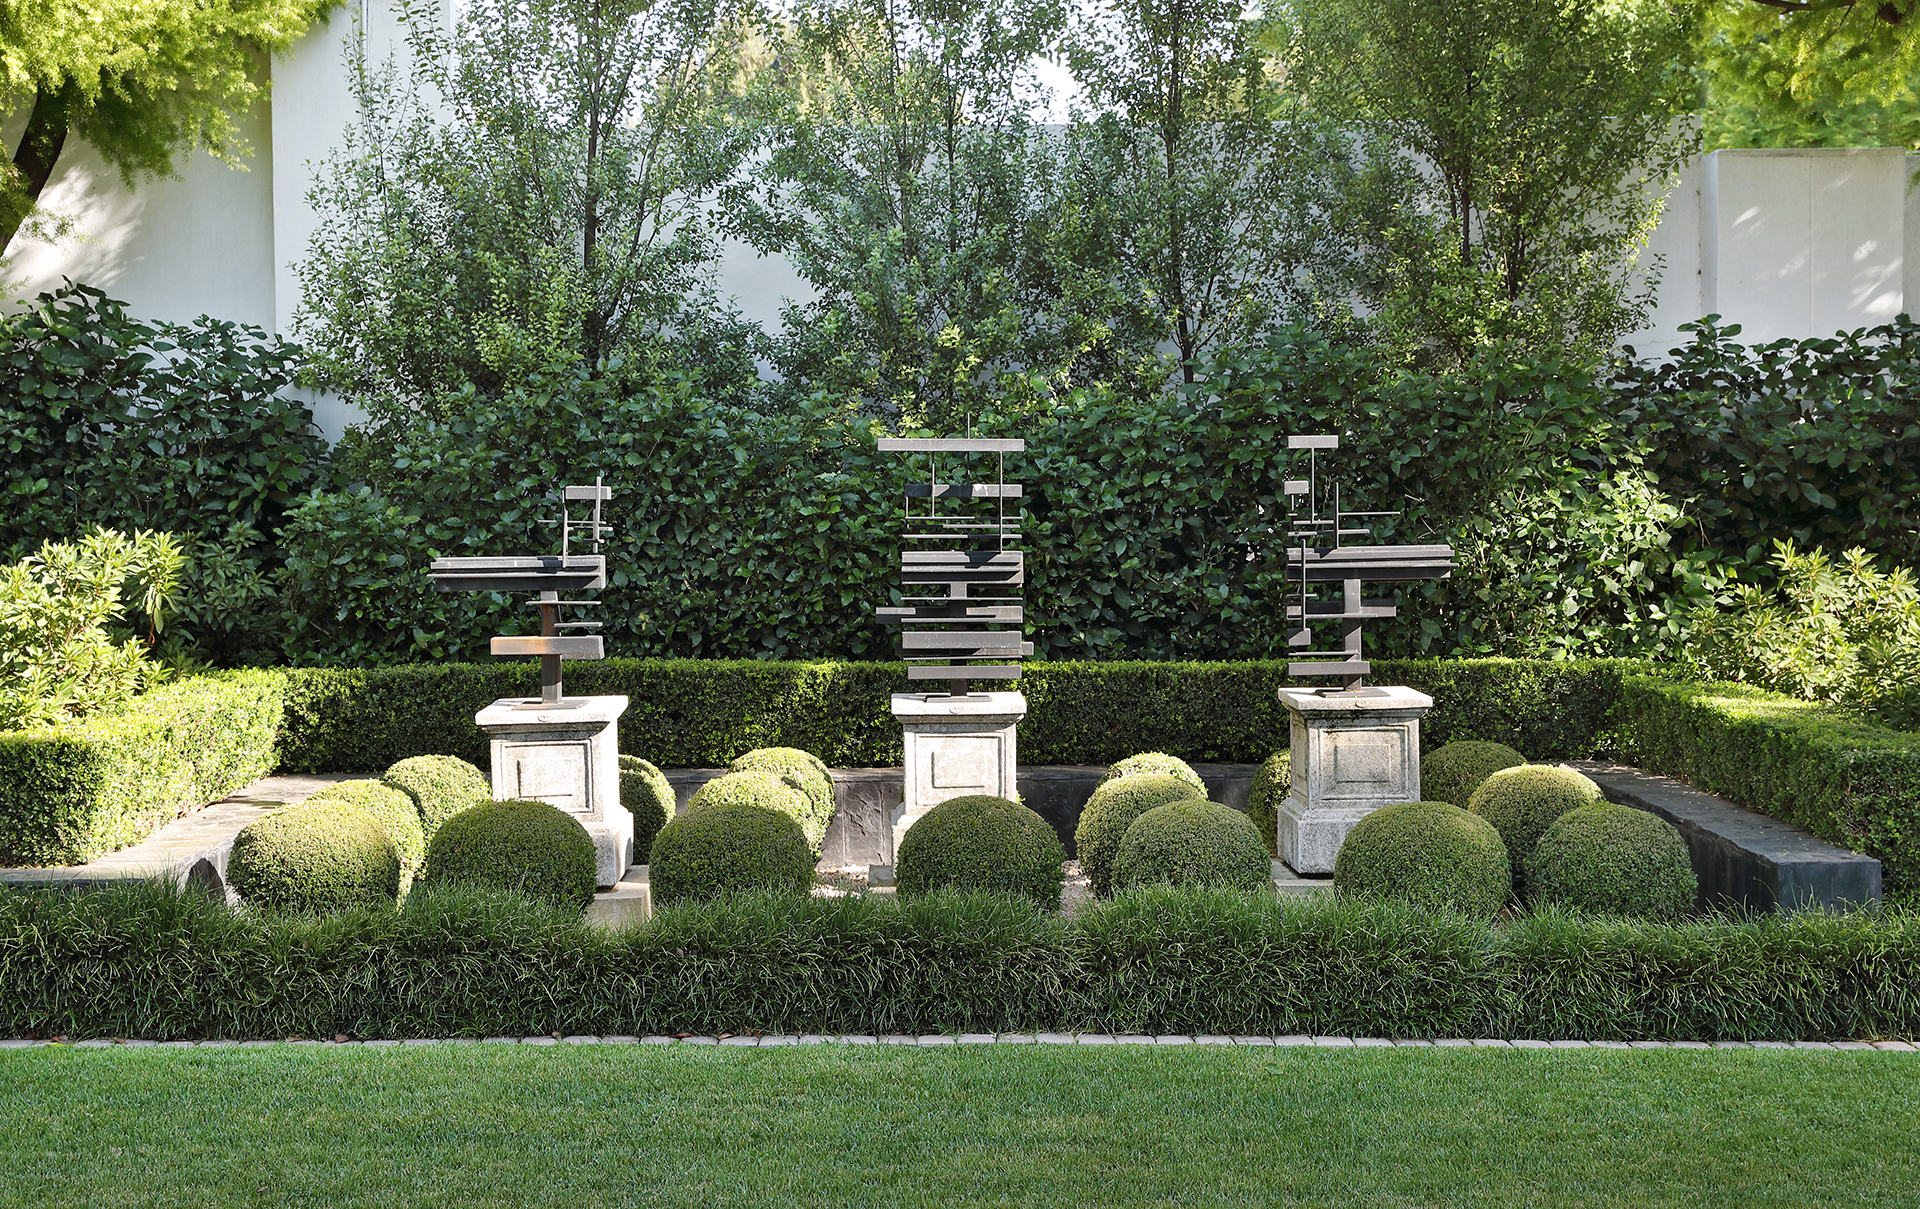 Formal garden with hedges and three modern metal sculptures on plinths, by Young Garden Design.